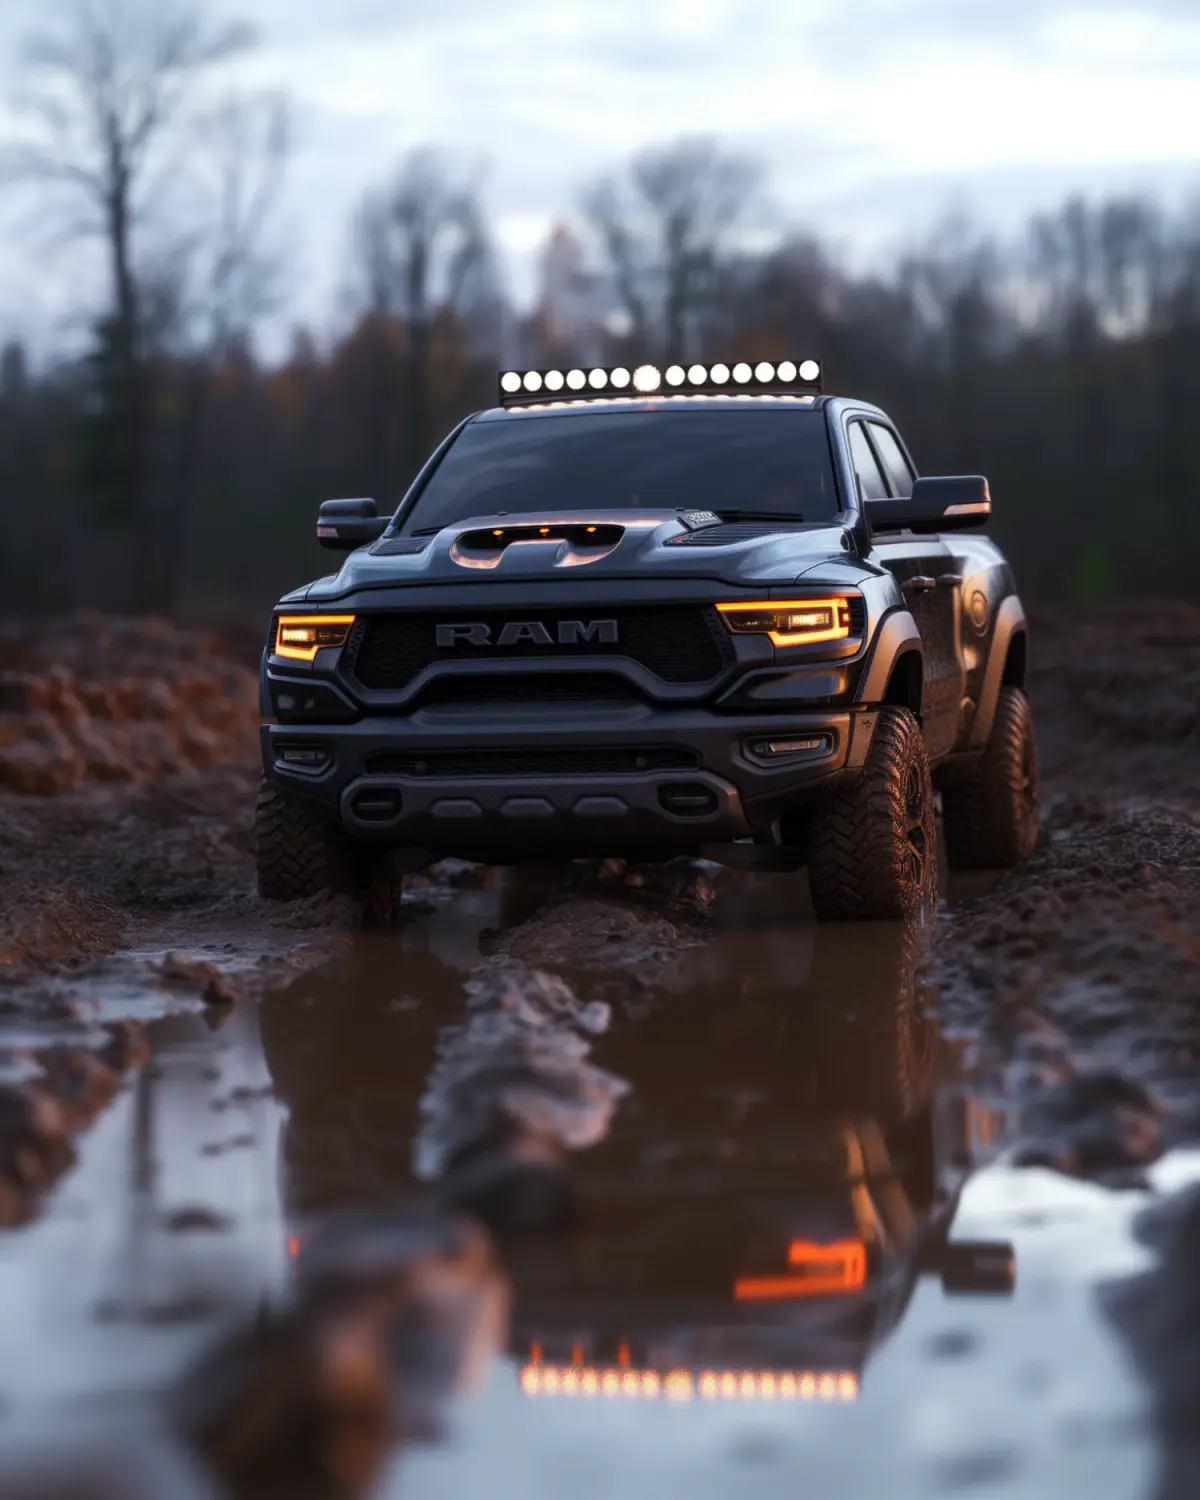 Modified Dodge Ram 1500 with off-road features in muddy terrain